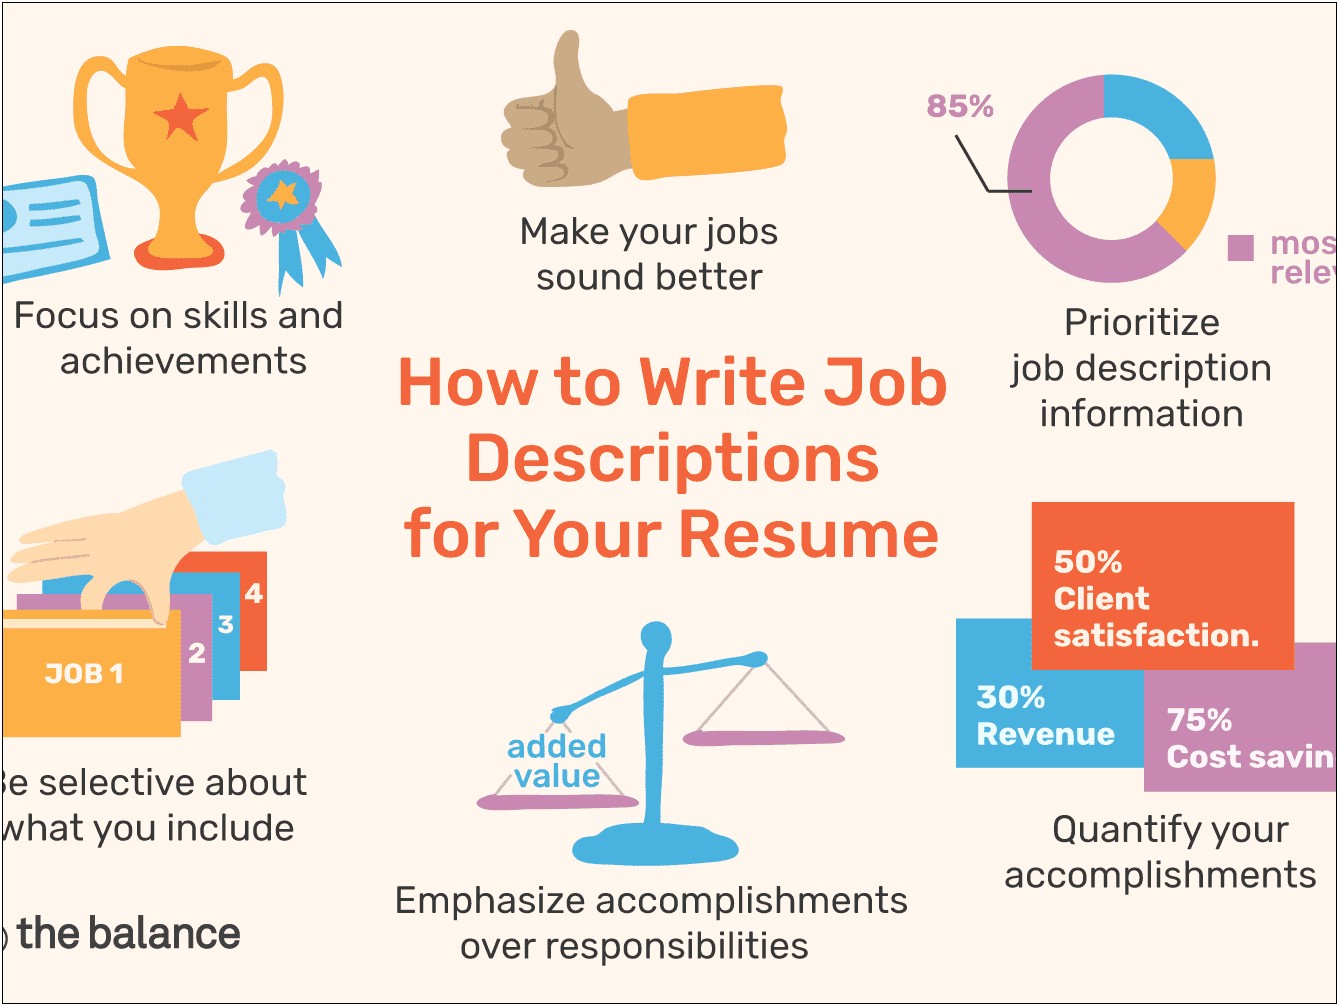 Should You Include Short Jobs On Your Resume